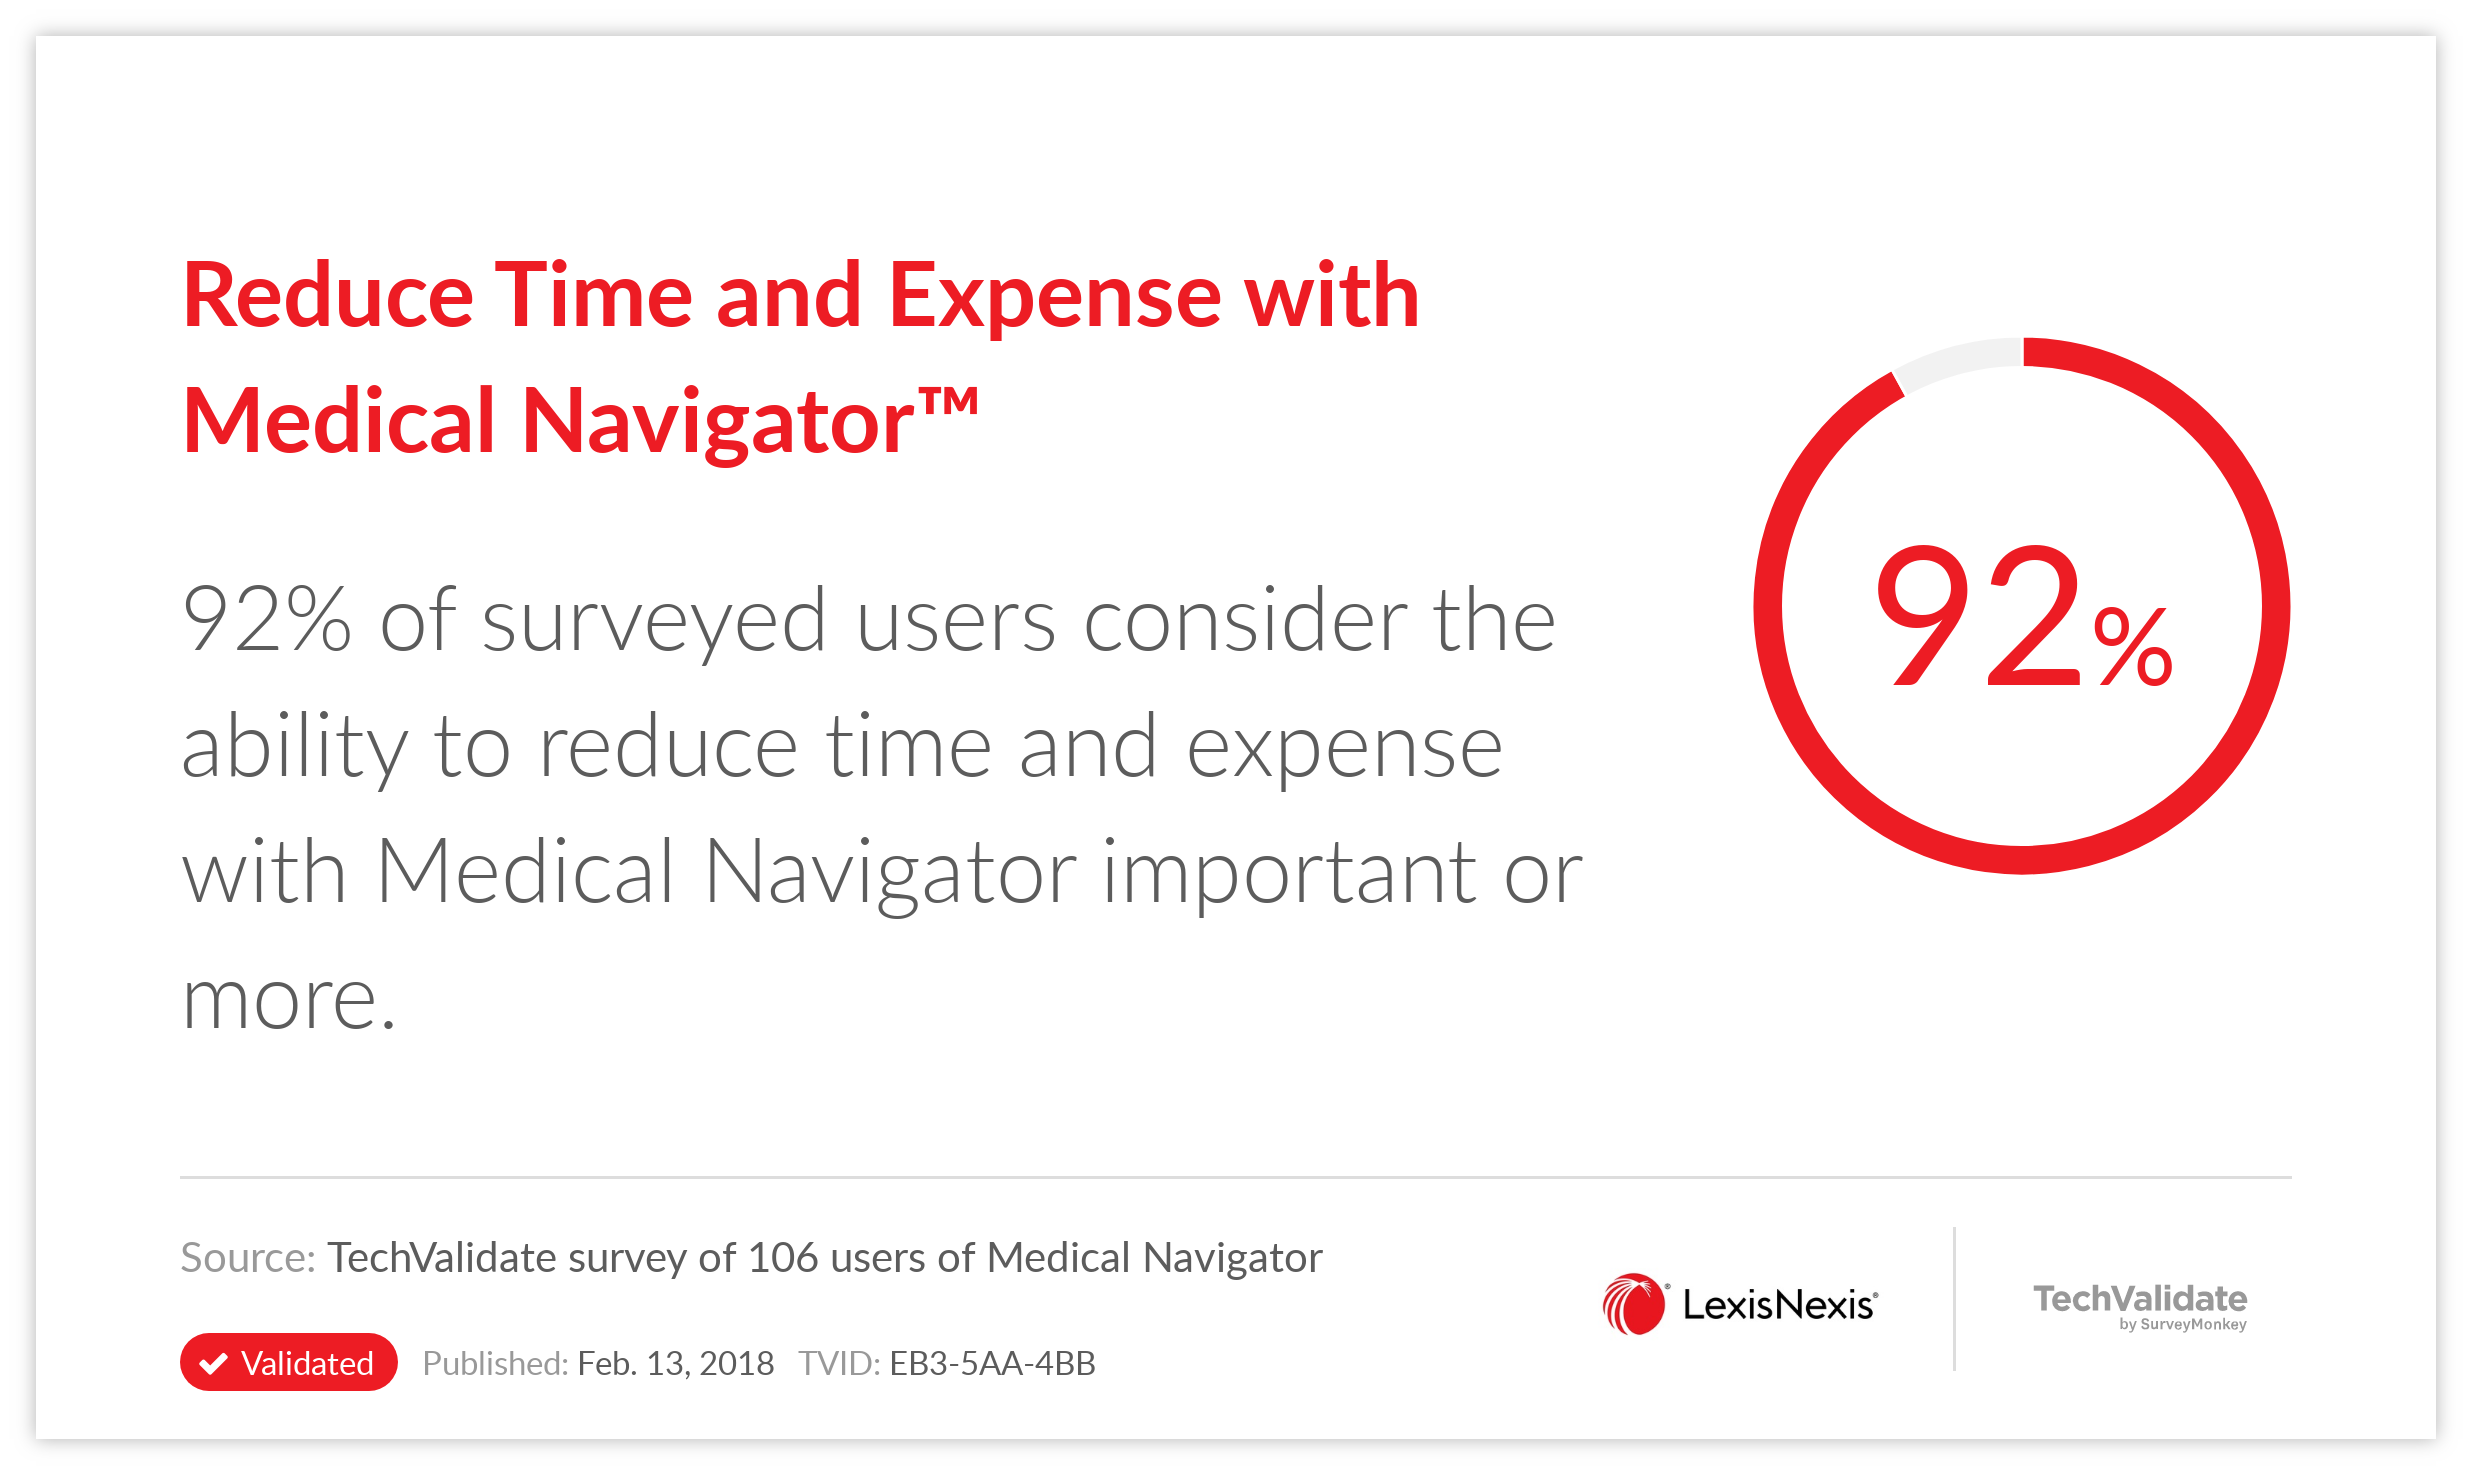 Reduce Time and Expense with Medical Navigator(TM)